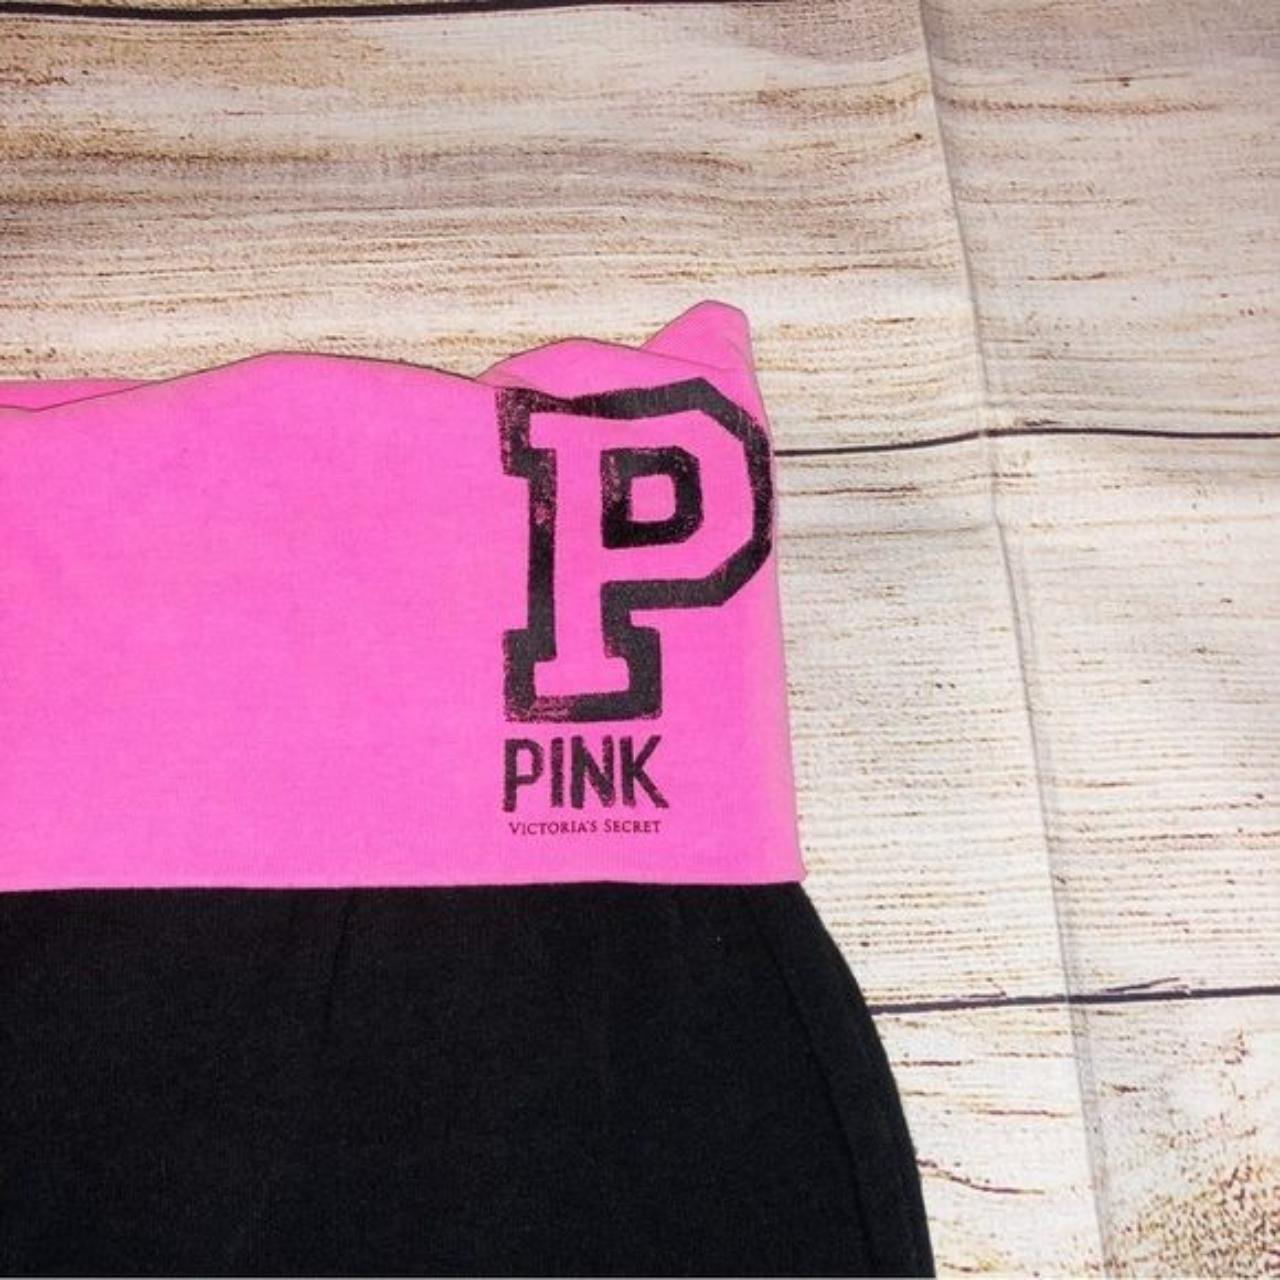 PINK by Victoria Secret Yoga Pants, Size XS, Black and